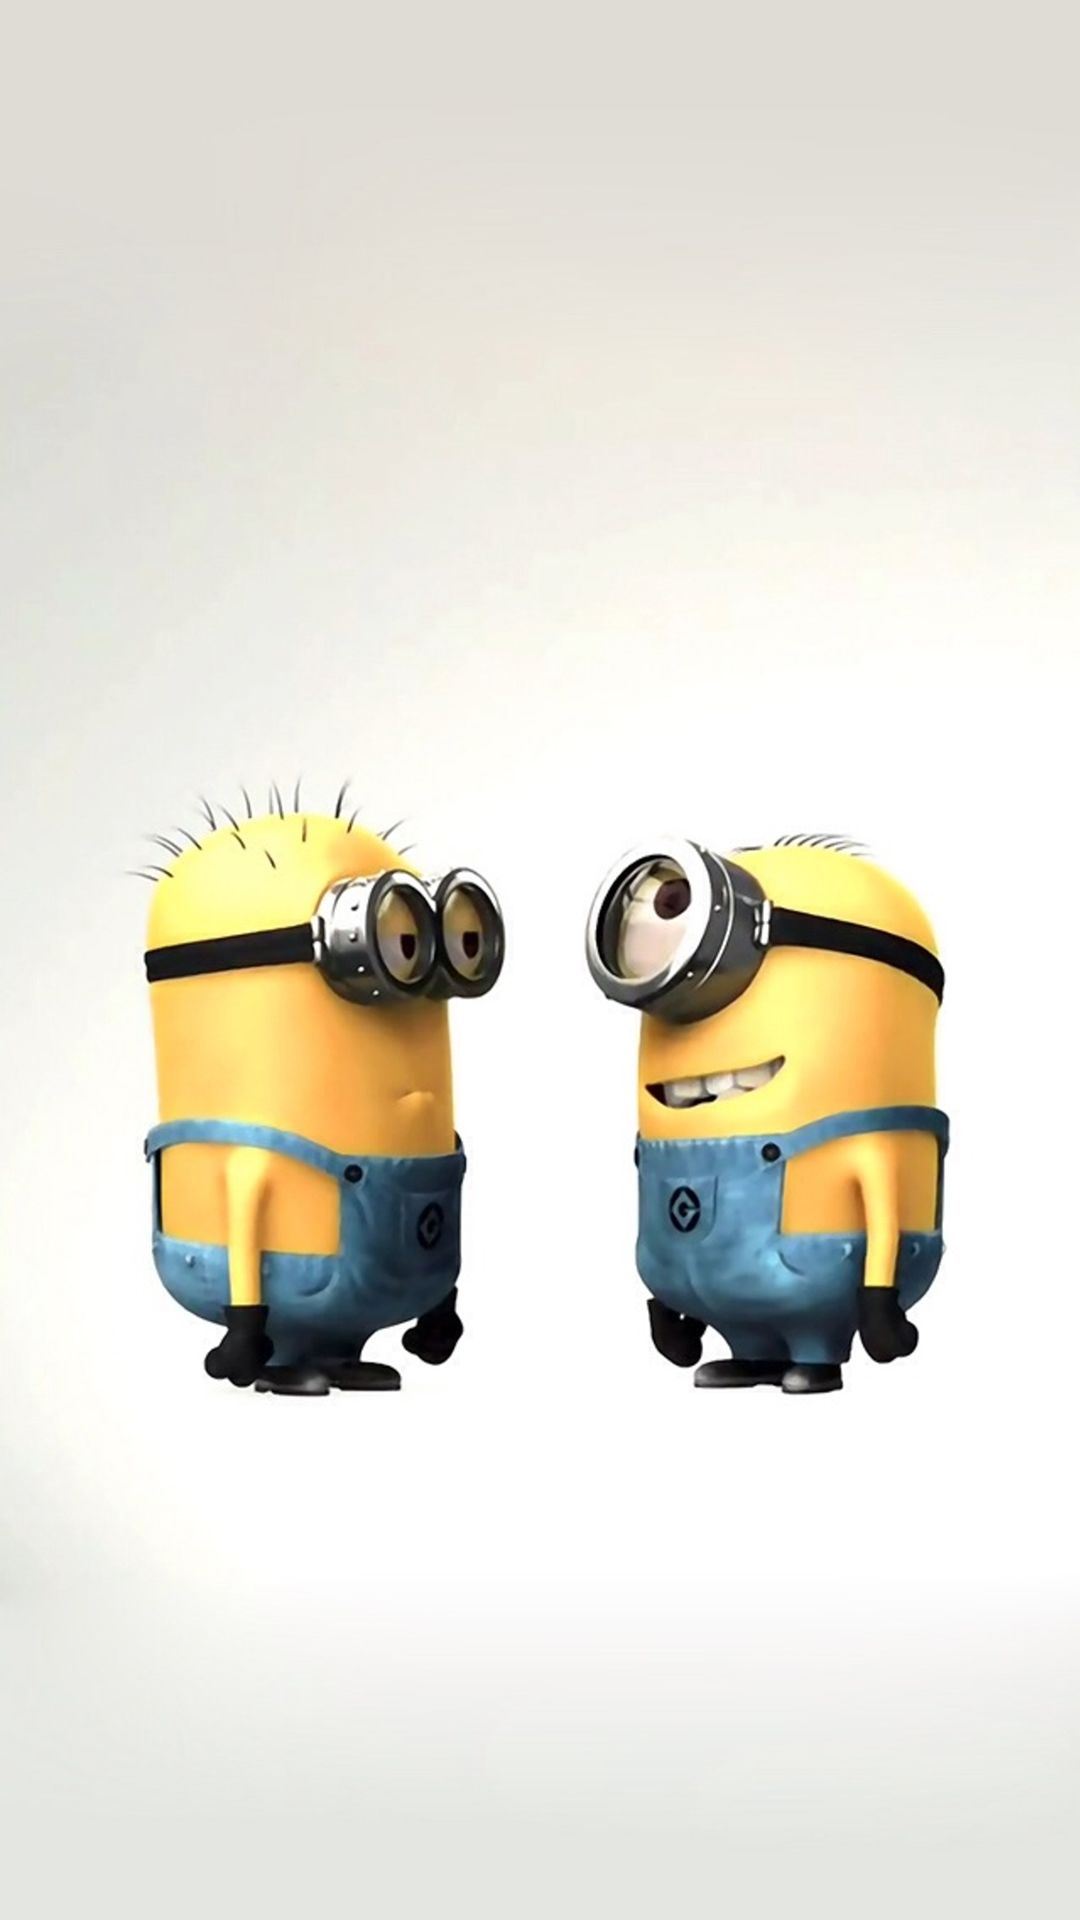 Funny Cute Lovely Minion Couple iPhone 8 Wallpaper Free Download